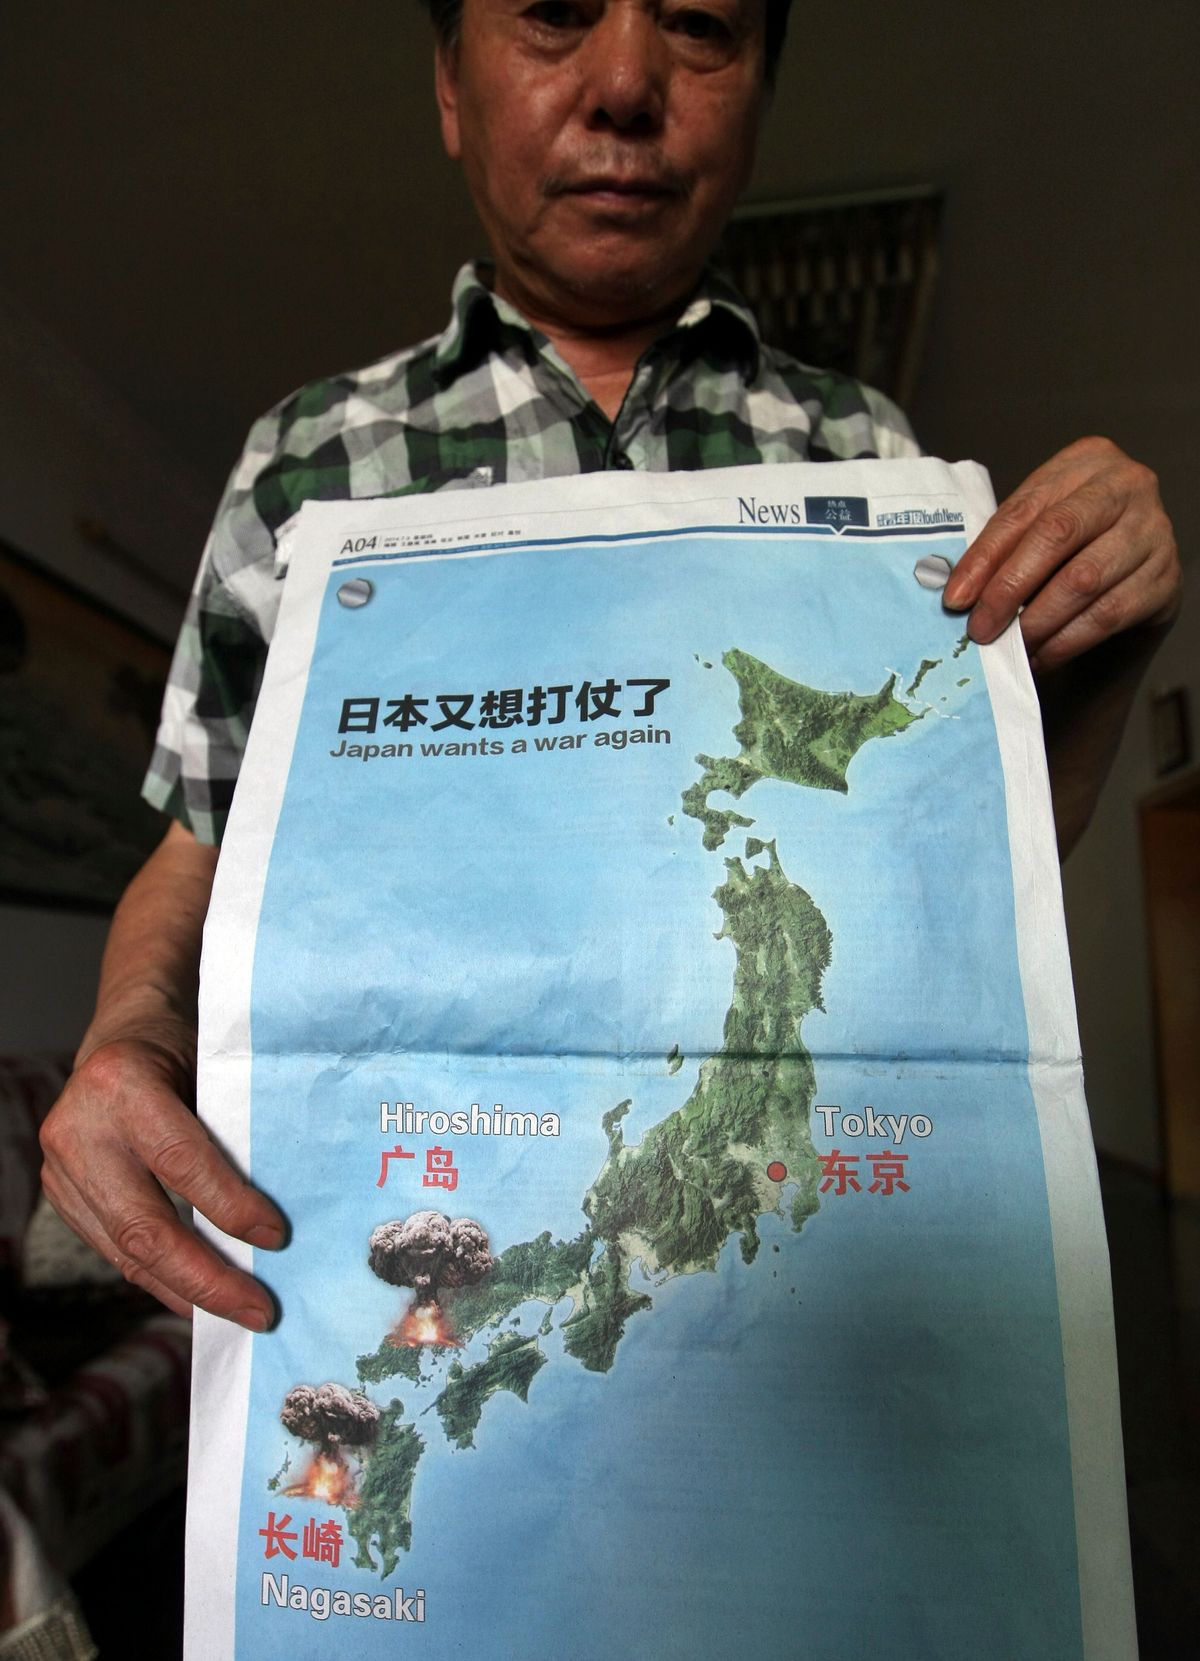 A man poses with a full page map with the headline "Japan wants a war again" and showing mushroom clouds over Hiroshima and Nagasaki that was published on the July 3, 2014 issue of the Chongqing Youth Daily newspaper, days after Japan reinterpreted its war-renouncing constitution to allow a greater military role,  in Chongqing, China, Wednesday, July 9, 2014.  Japan has protested to China over cartoon drawings of exploding mushroom clouds in a Japanese map published in the newspaper last week, saying the graphic offended the atomic bombing survivors and their relatives. (AP Photo) CHINA OUT (AP)